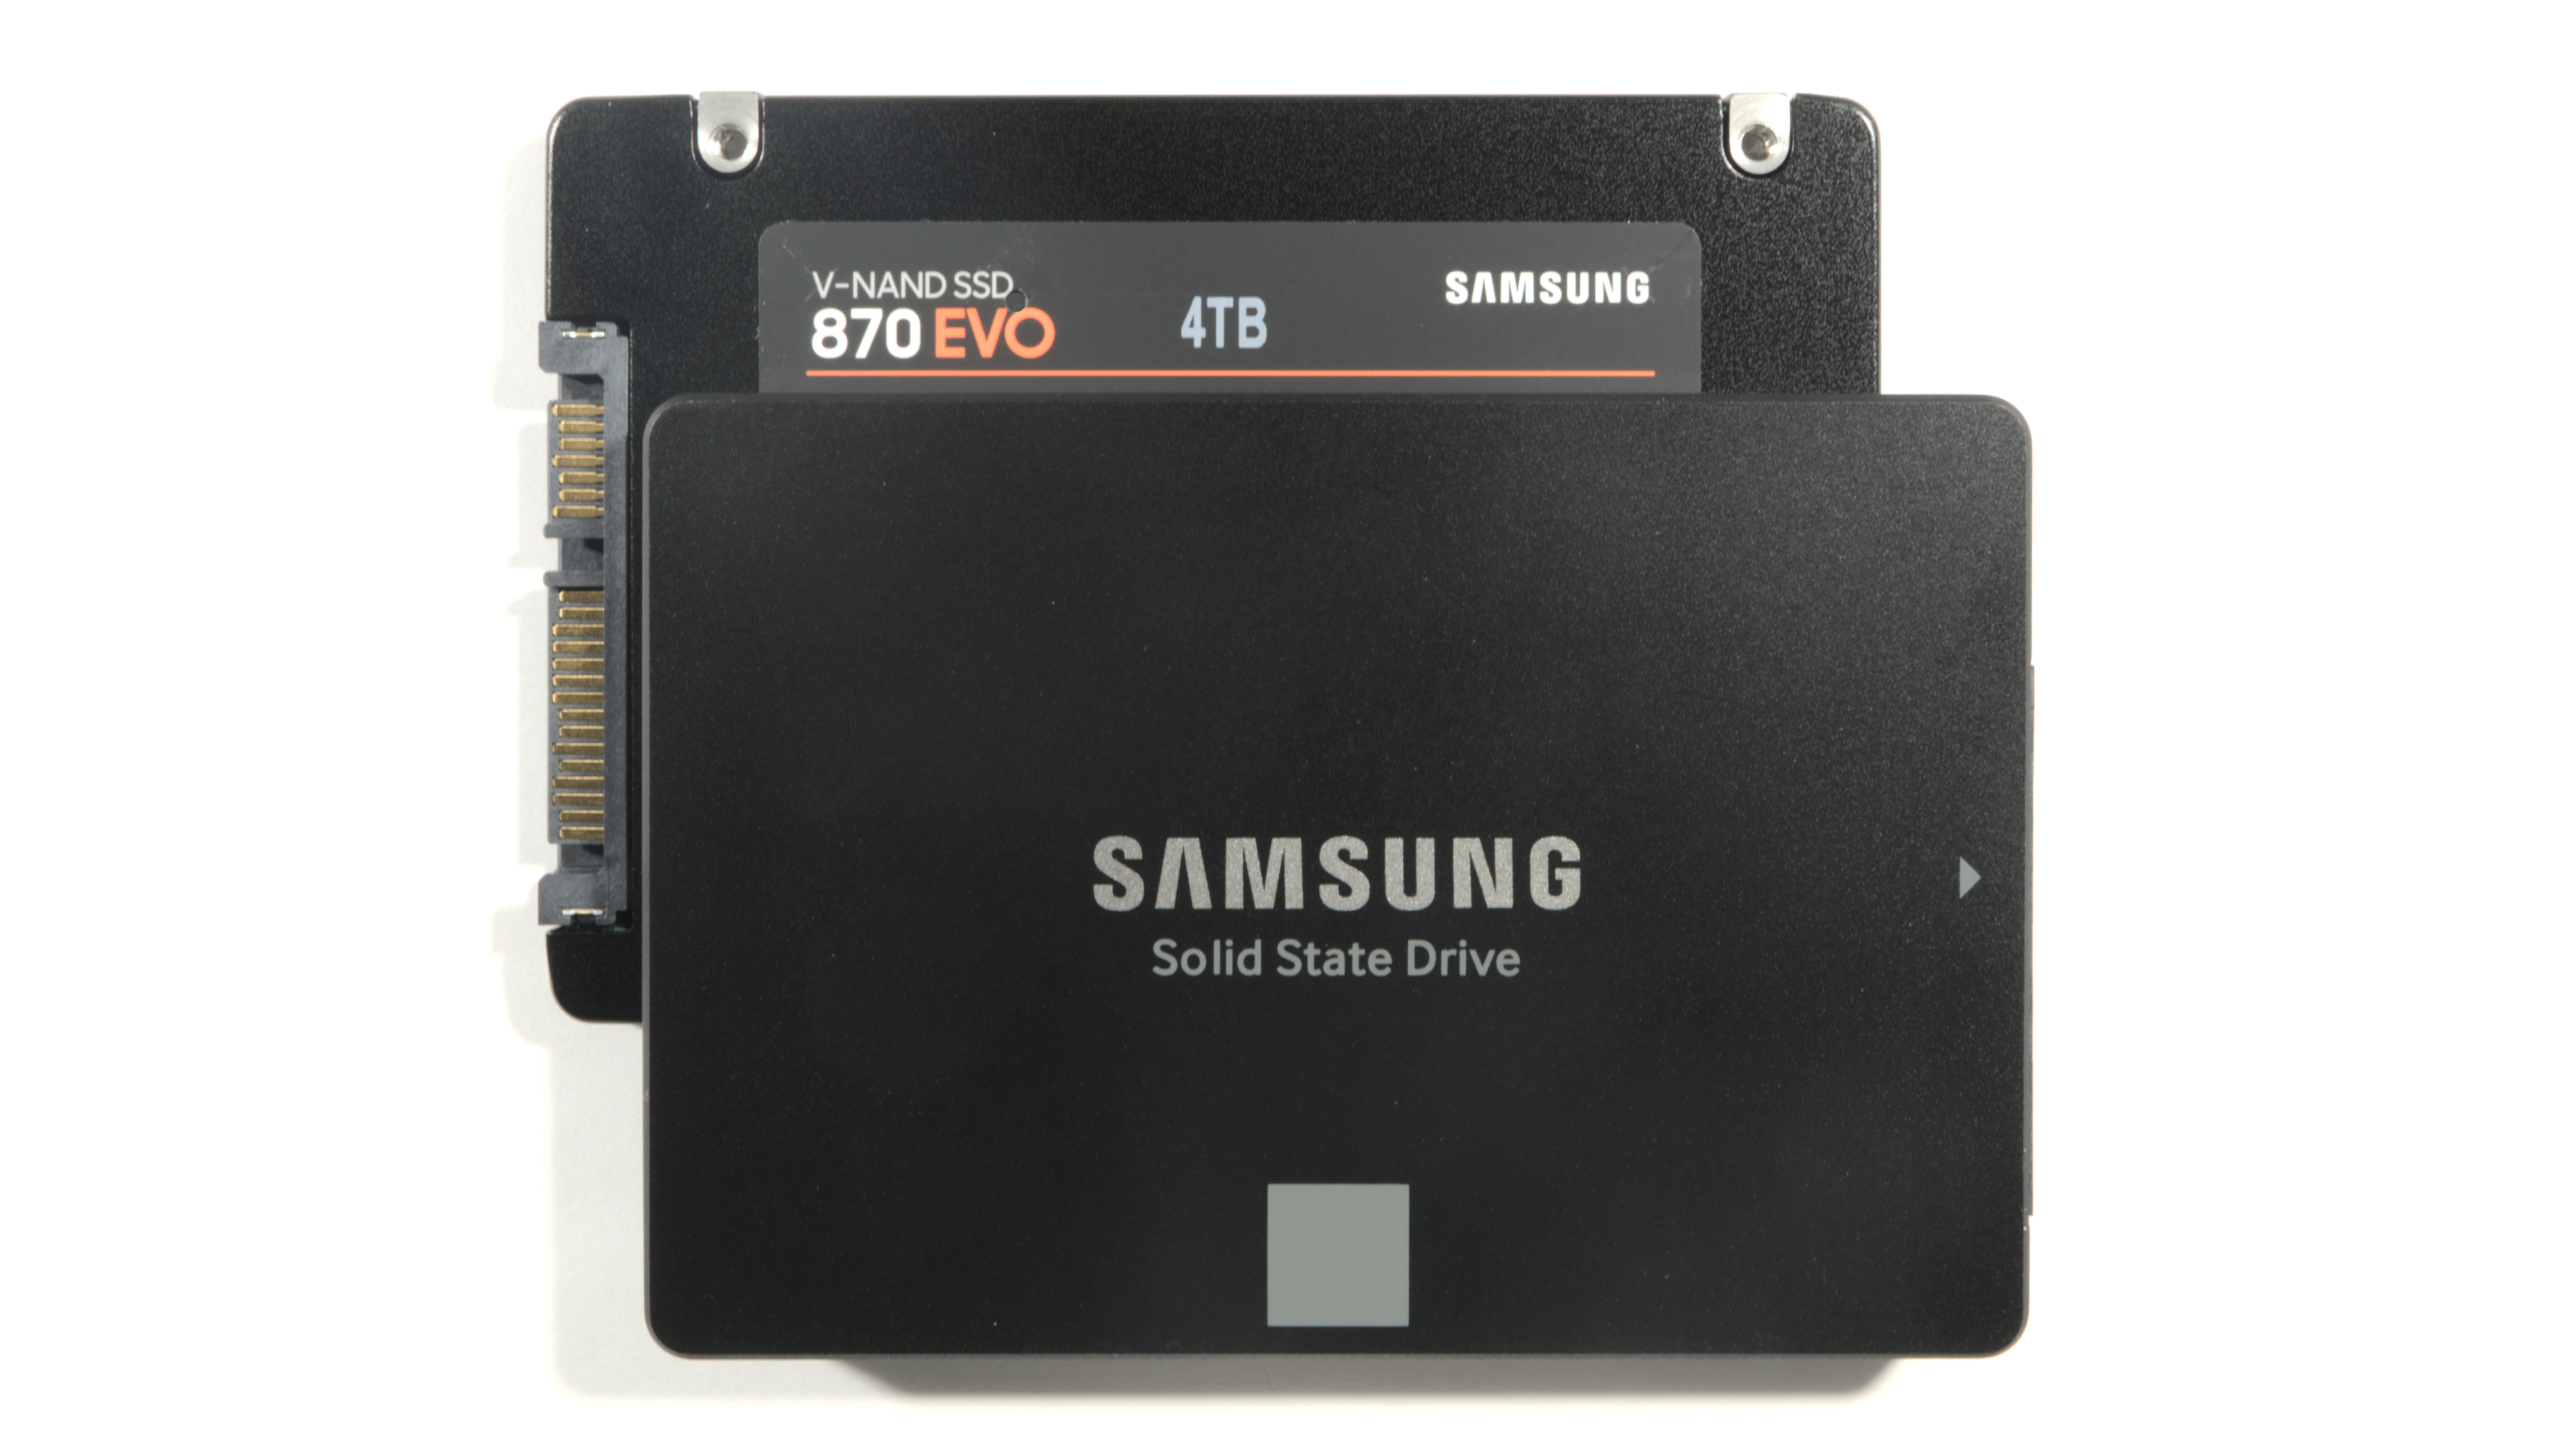 Samsung 870 EVO SATA SSD review: The speed you need, at sane